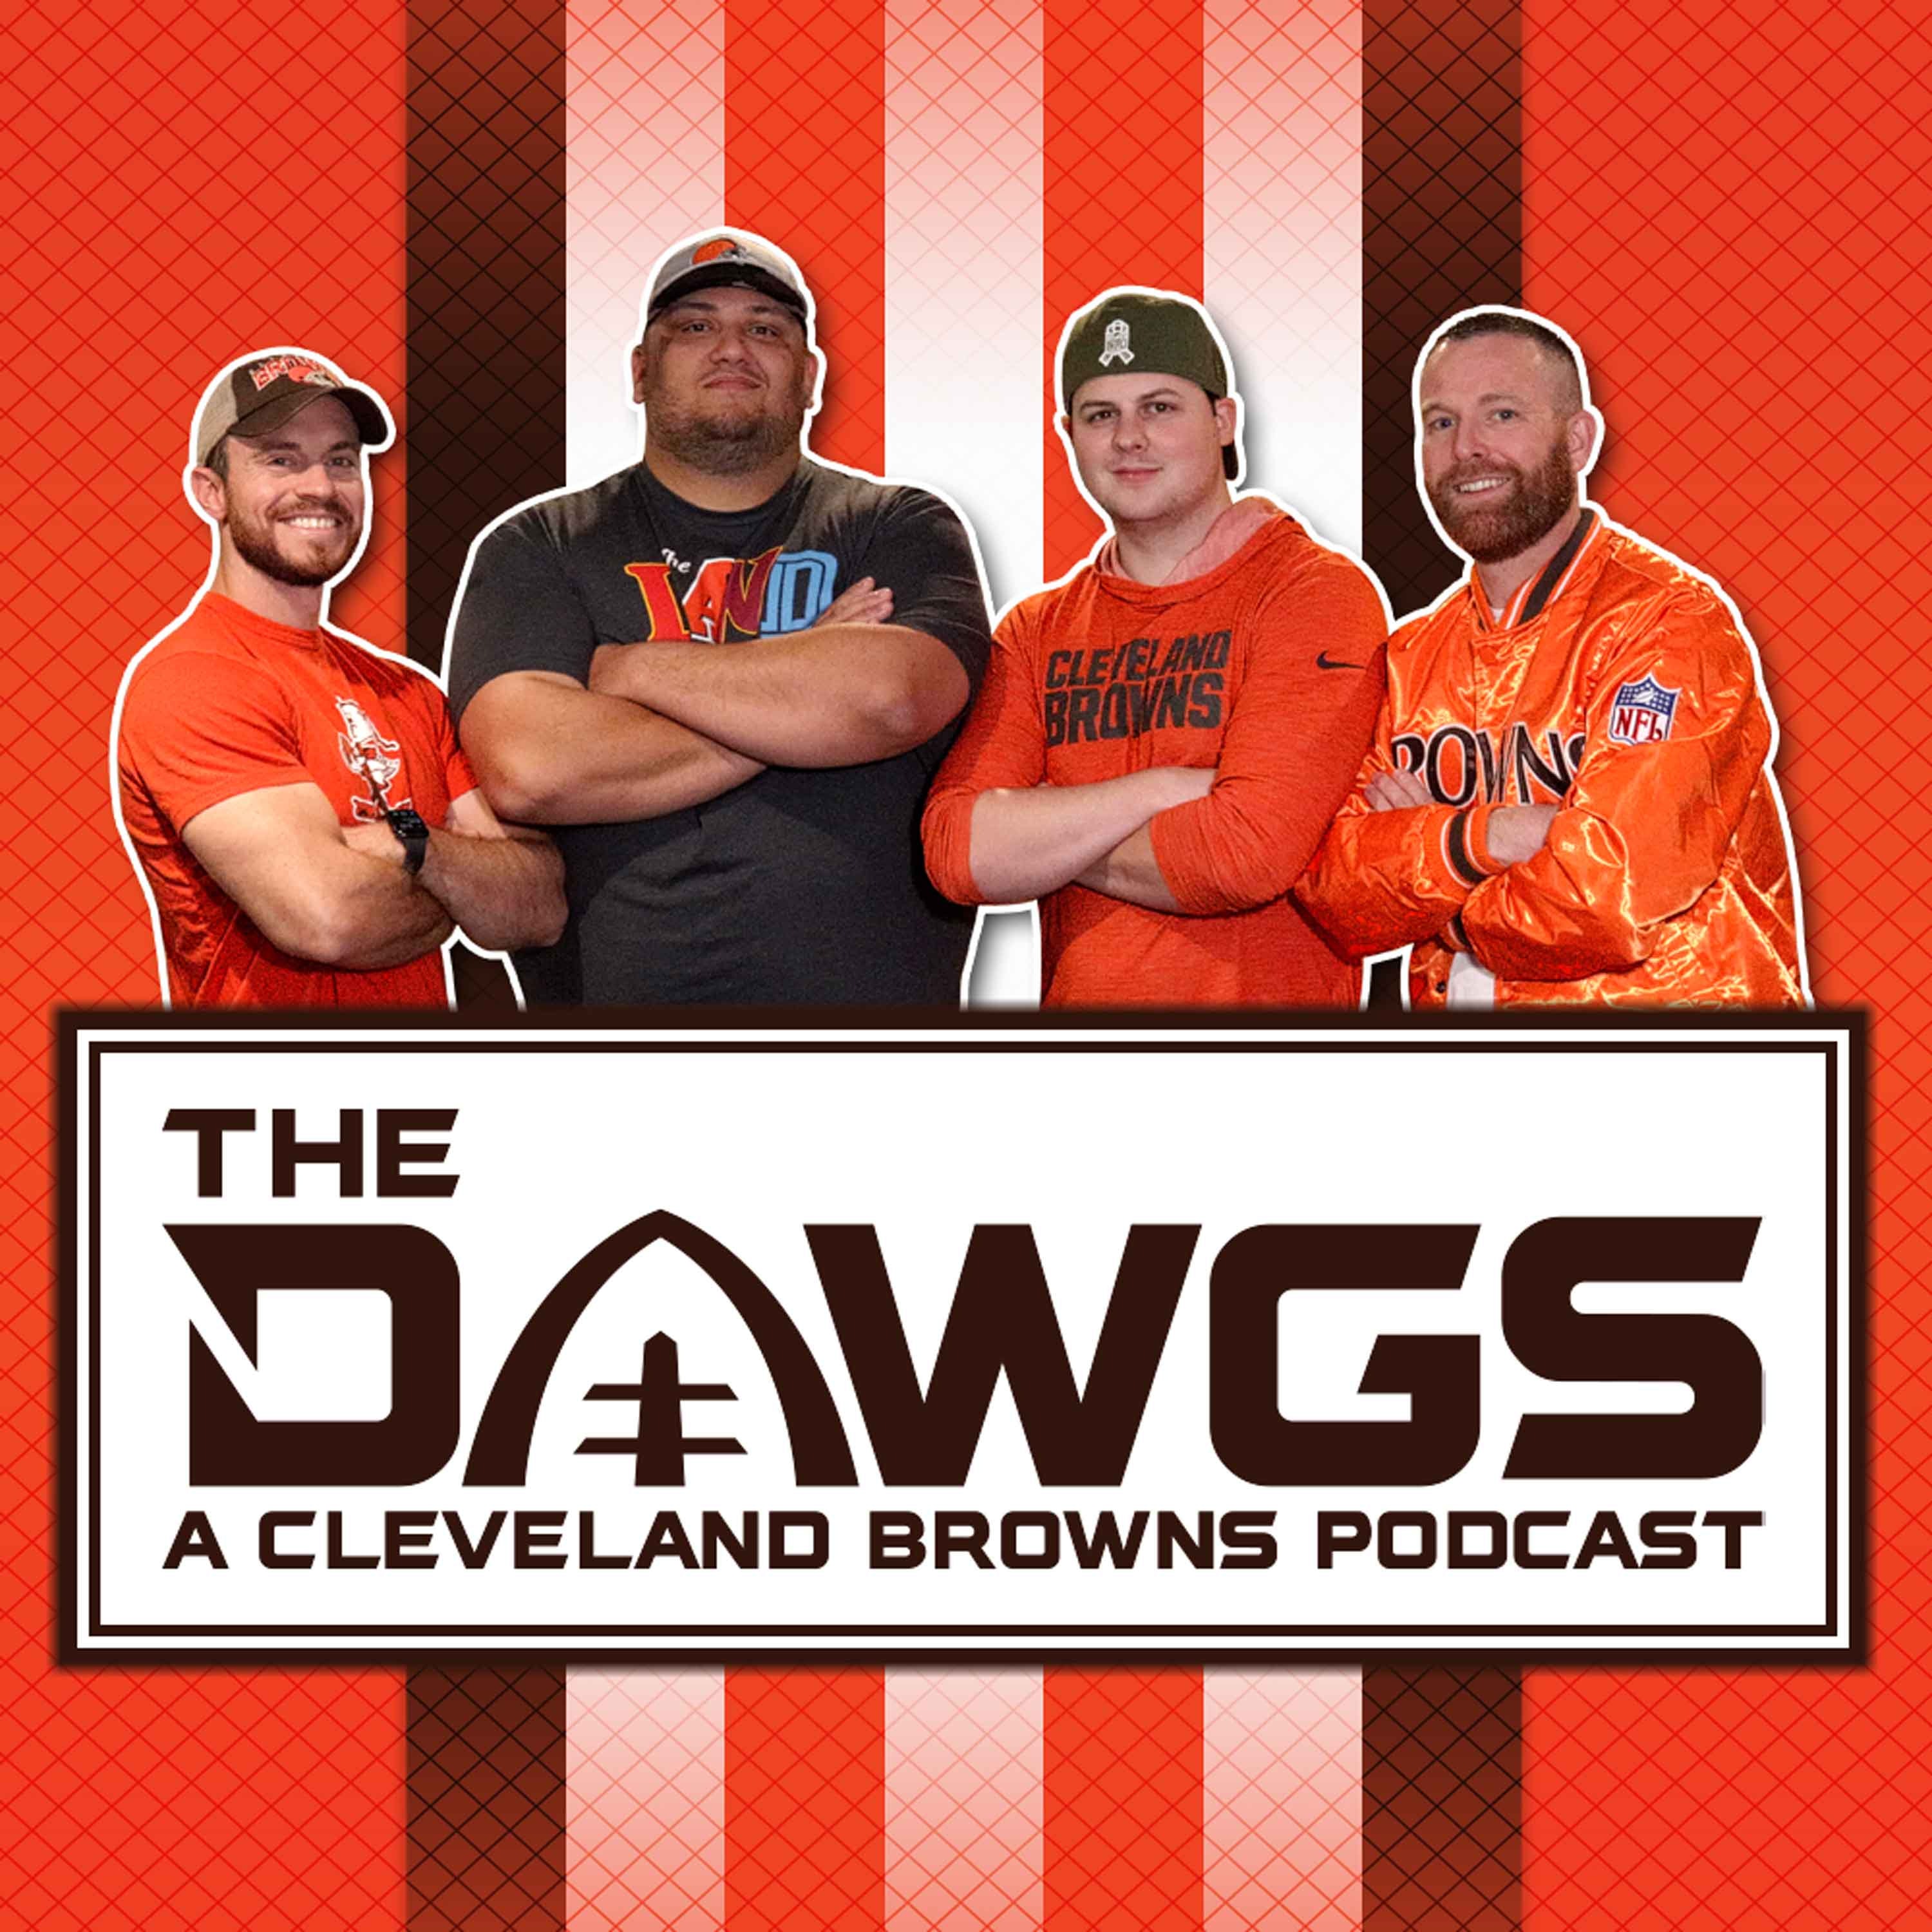 Joe Thomas, Super Bowl LVII, and the Best Browns Moments of 2022  | The Dawgs - A Cleveland Browns Podcast - February 9, 2023